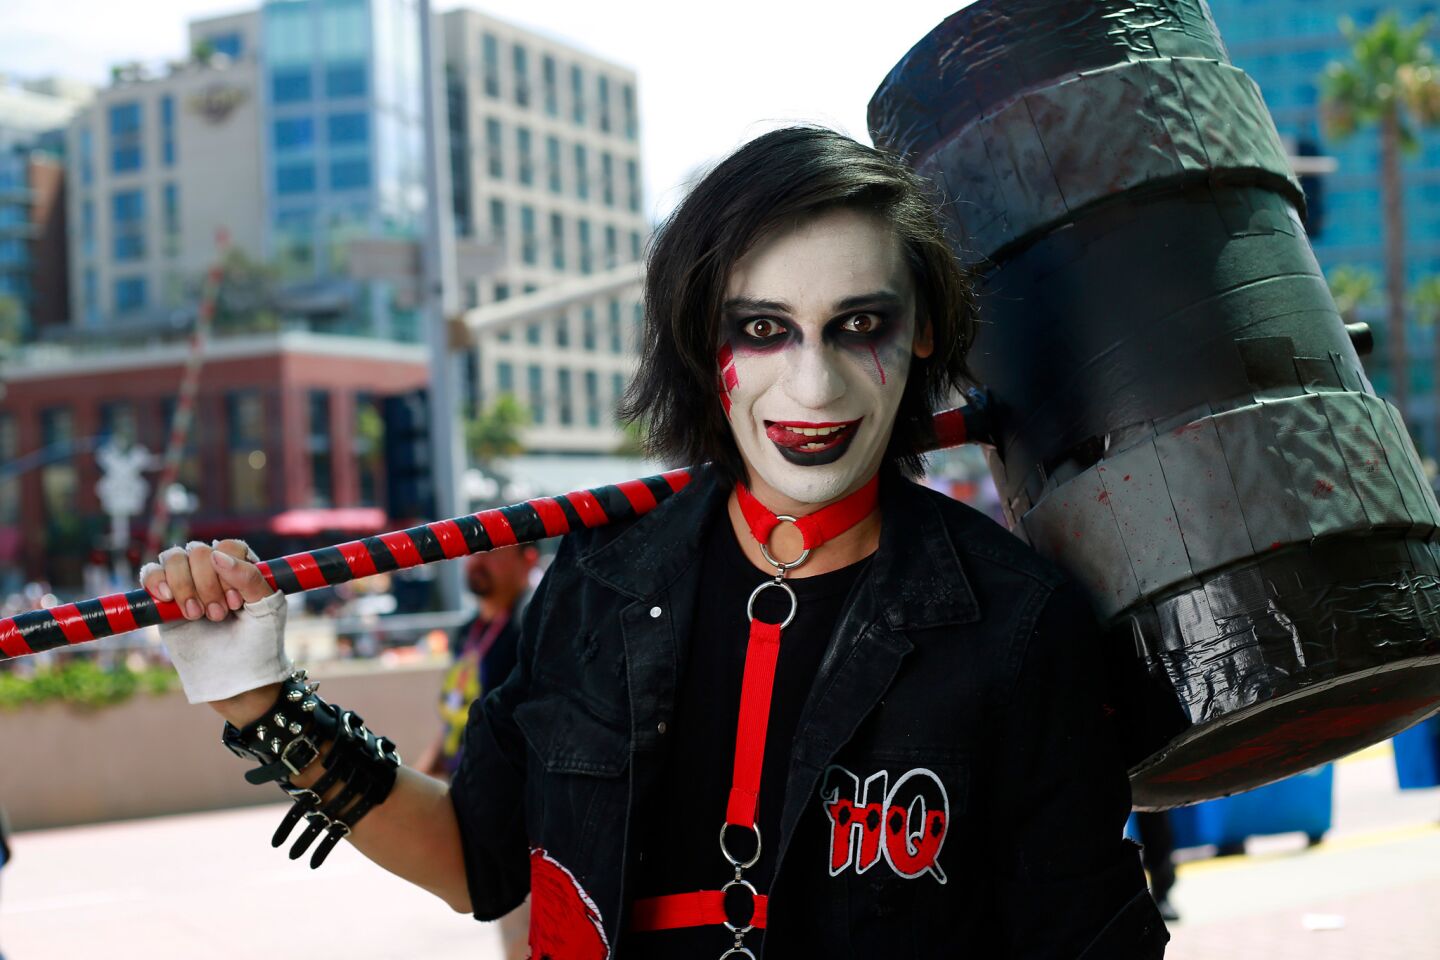 Francisco Bramblia of San Diego dressed as Harley Quinn at Comic-Con in San Diego on July 20.